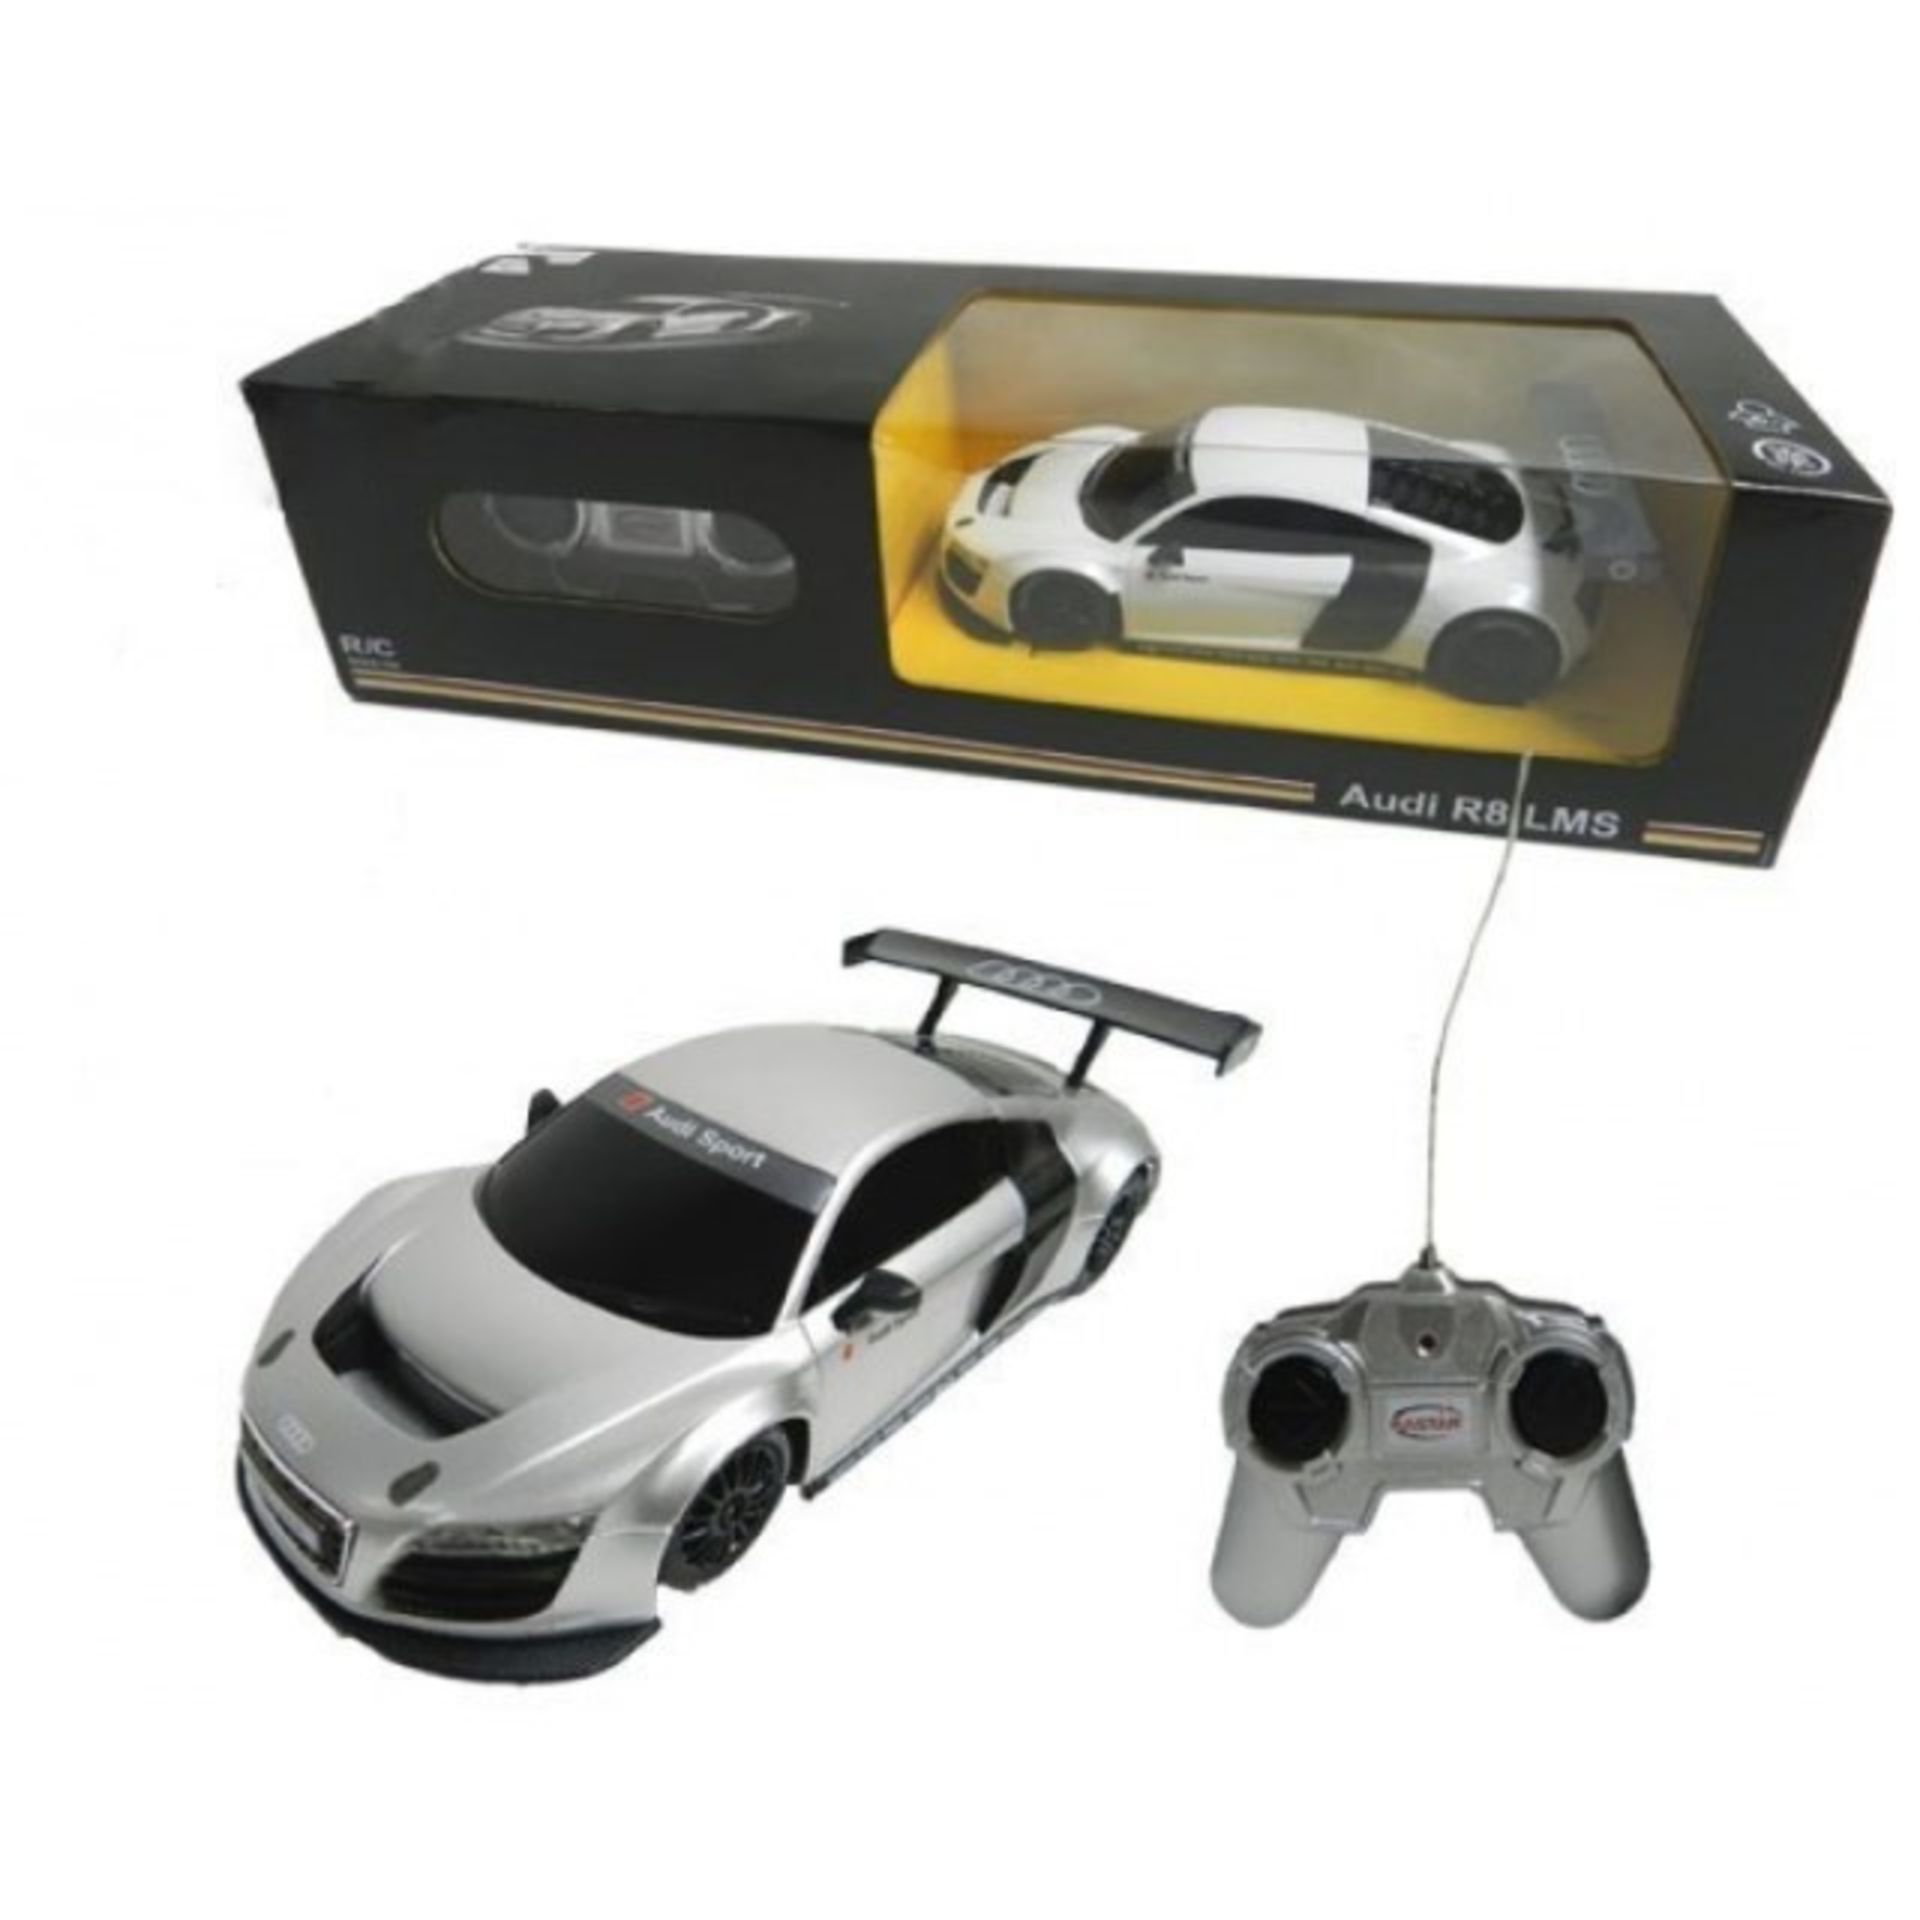 + VAT Brand New 1:24 Scale Radio Control Audi R8 LMS - Officially Licensed Product - Colour May